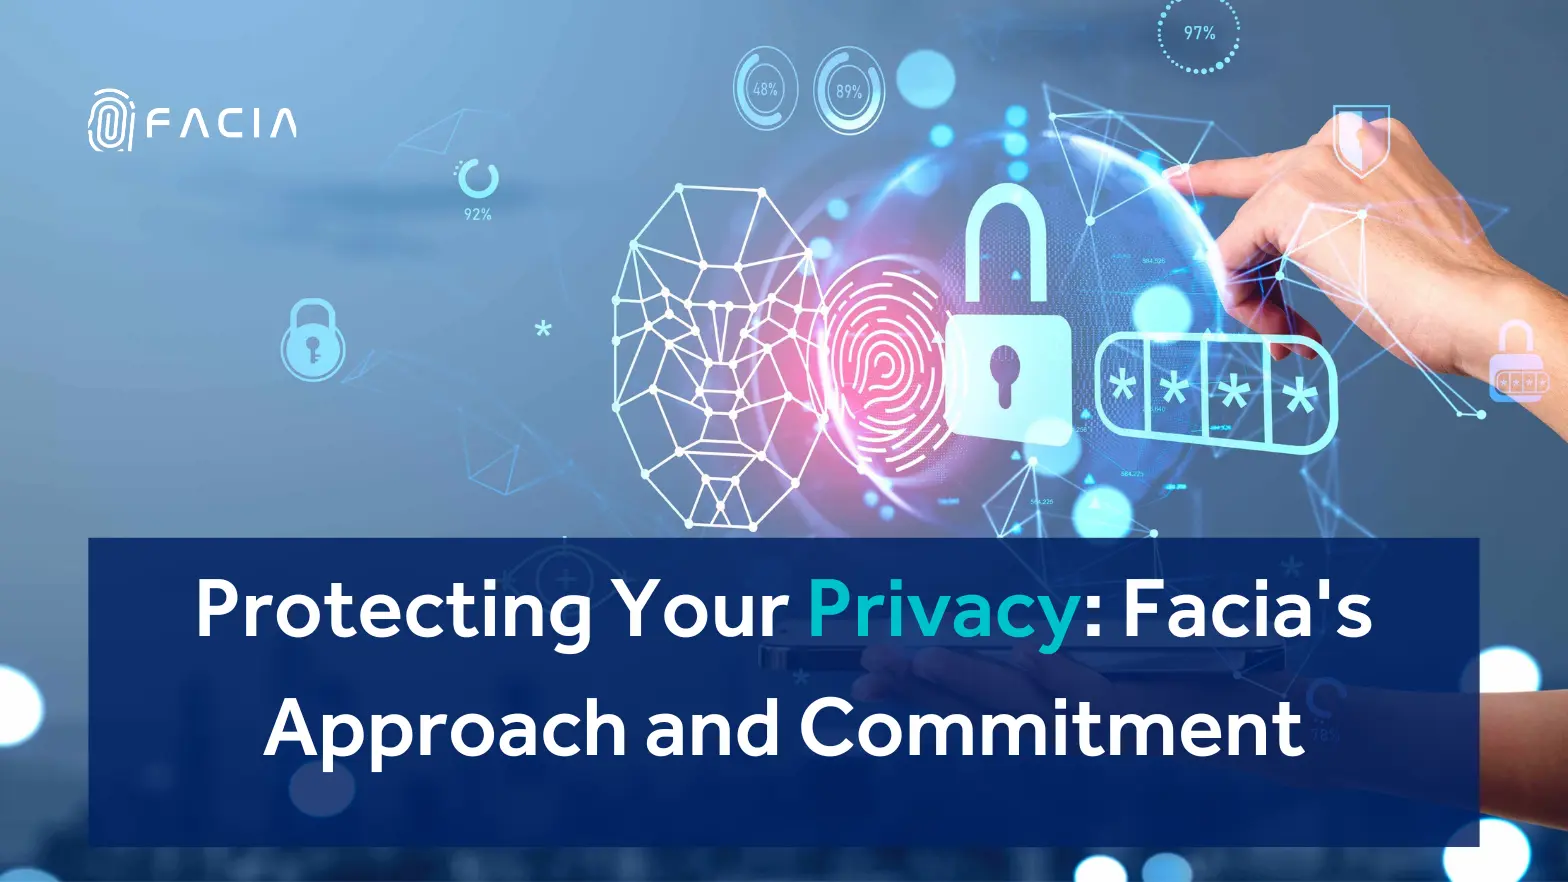 Facia's commitment to protecting user privacy and maintaining a secure approach in handling personal information